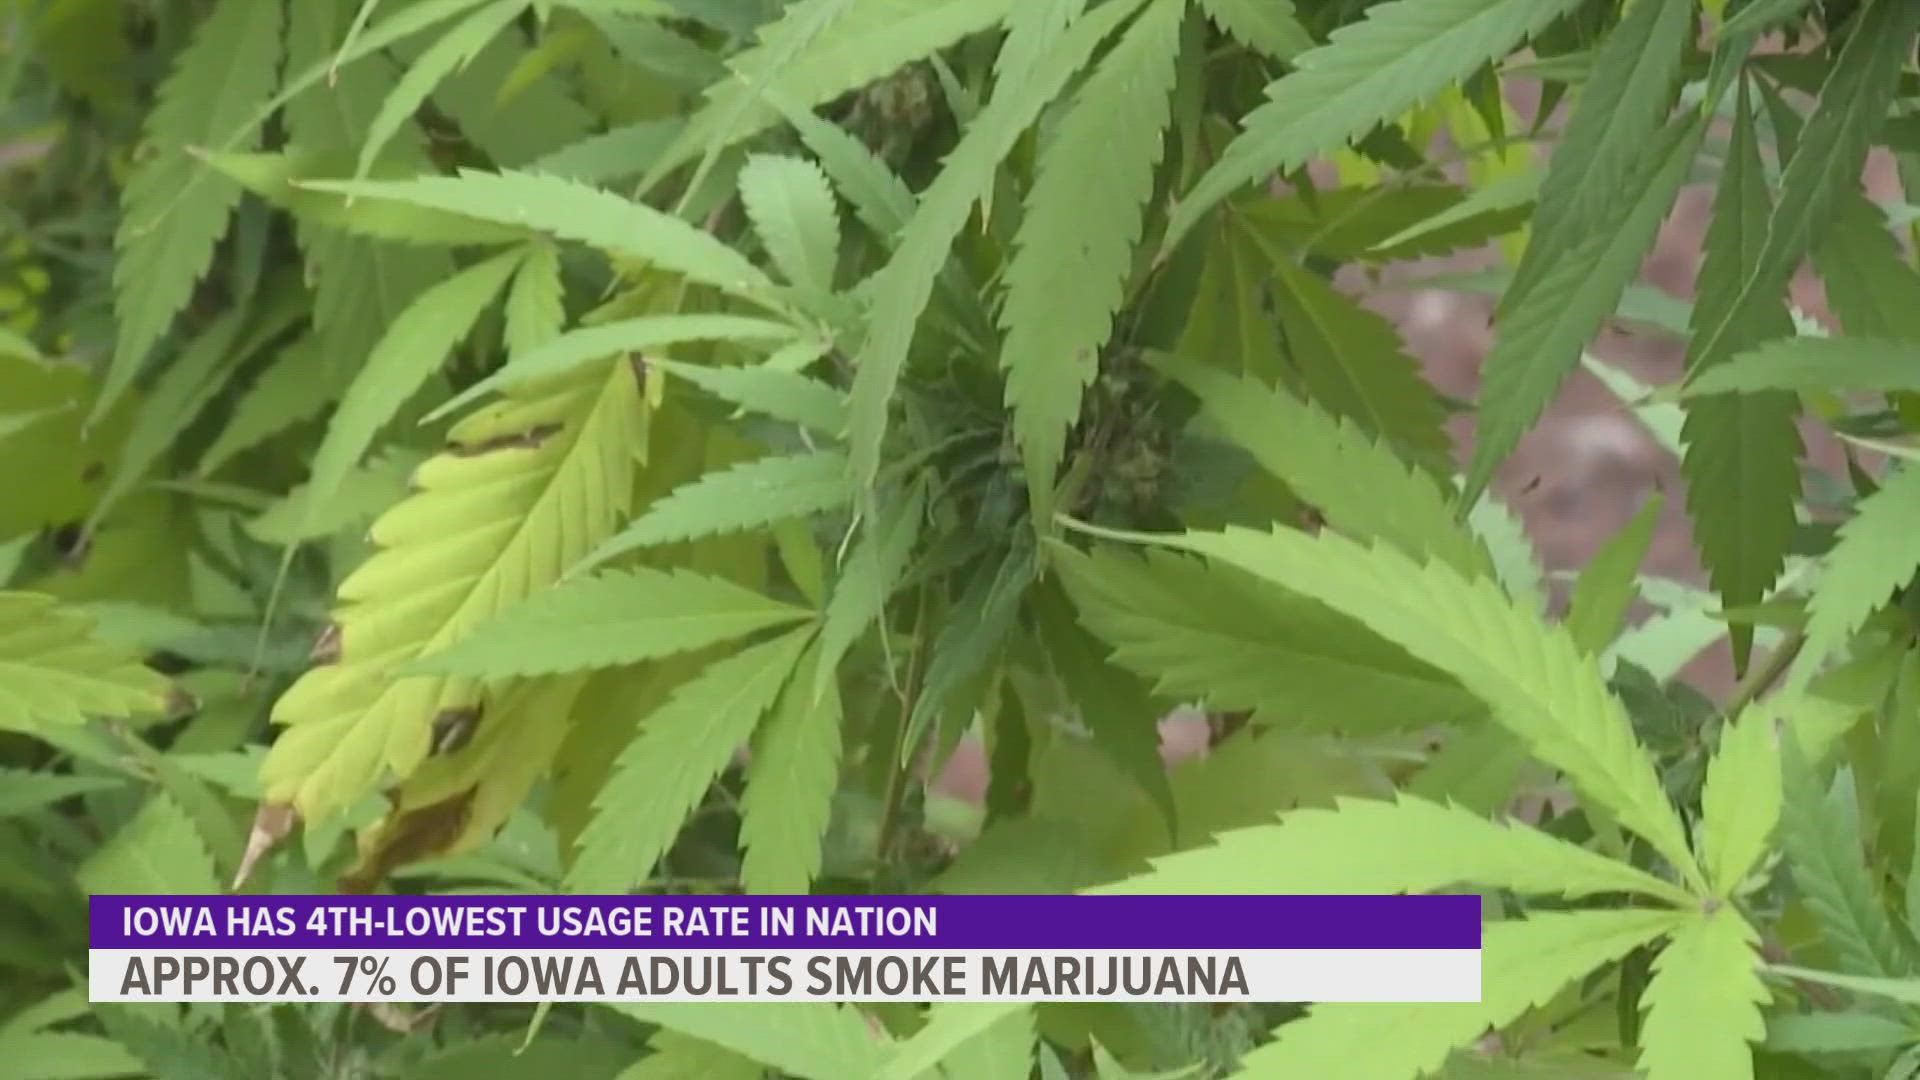 55% of drug arrests in Iowa are for marijuana, amid growing support for its legalization.